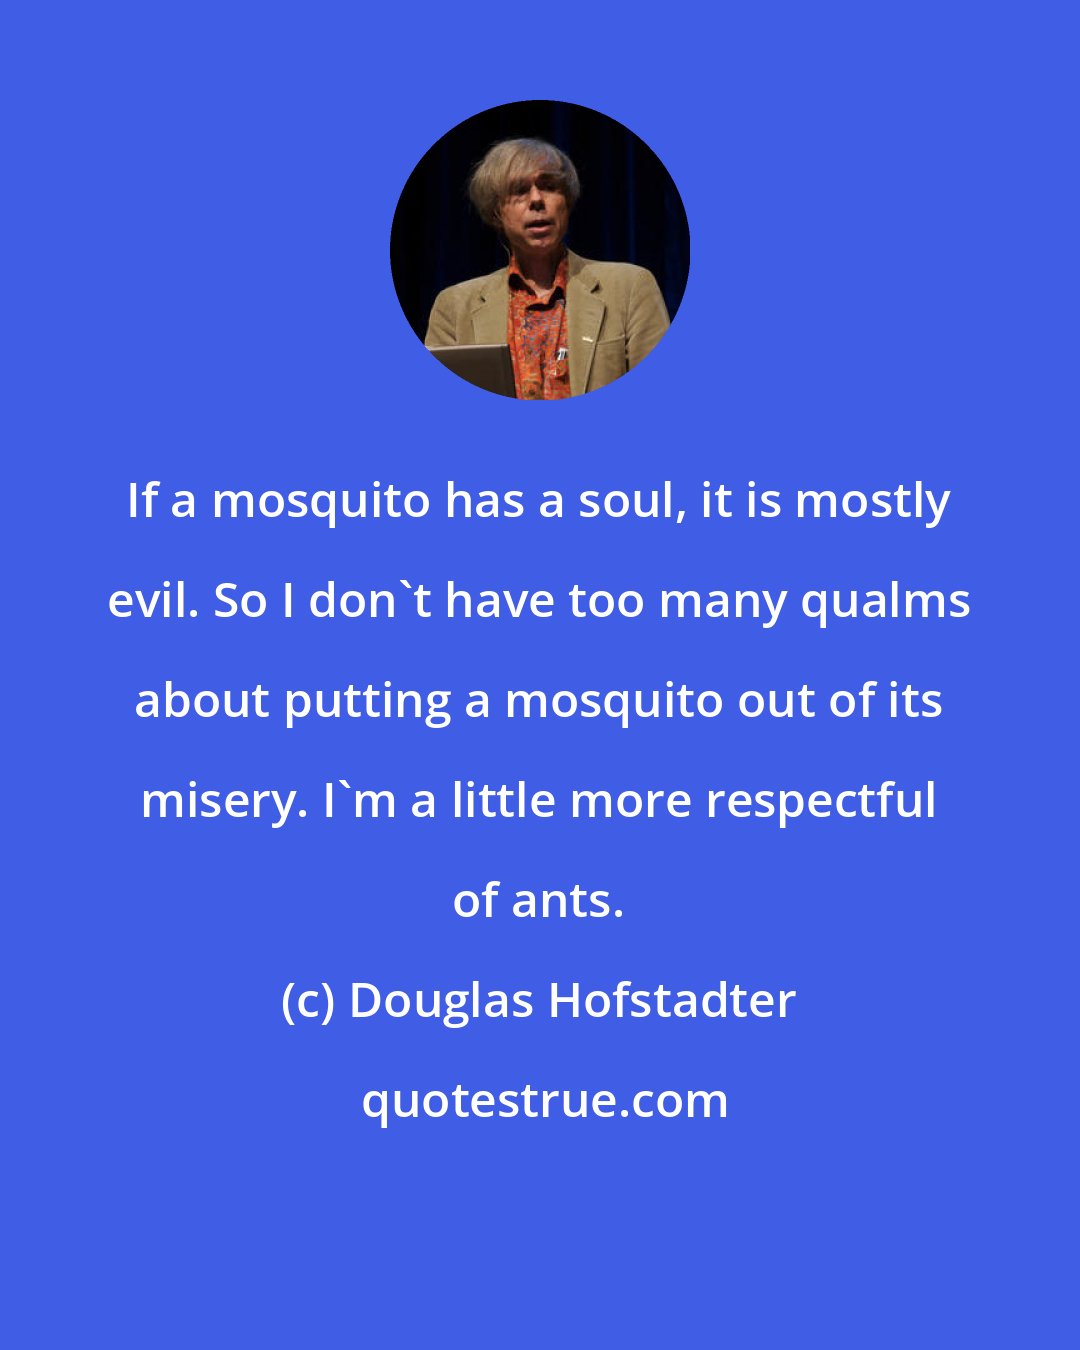 Douglas Hofstadter: If a mosquito has a soul, it is mostly evil. So I don't have too many qualms about putting a mosquito out of its misery. I'm a little more respectful of ants.